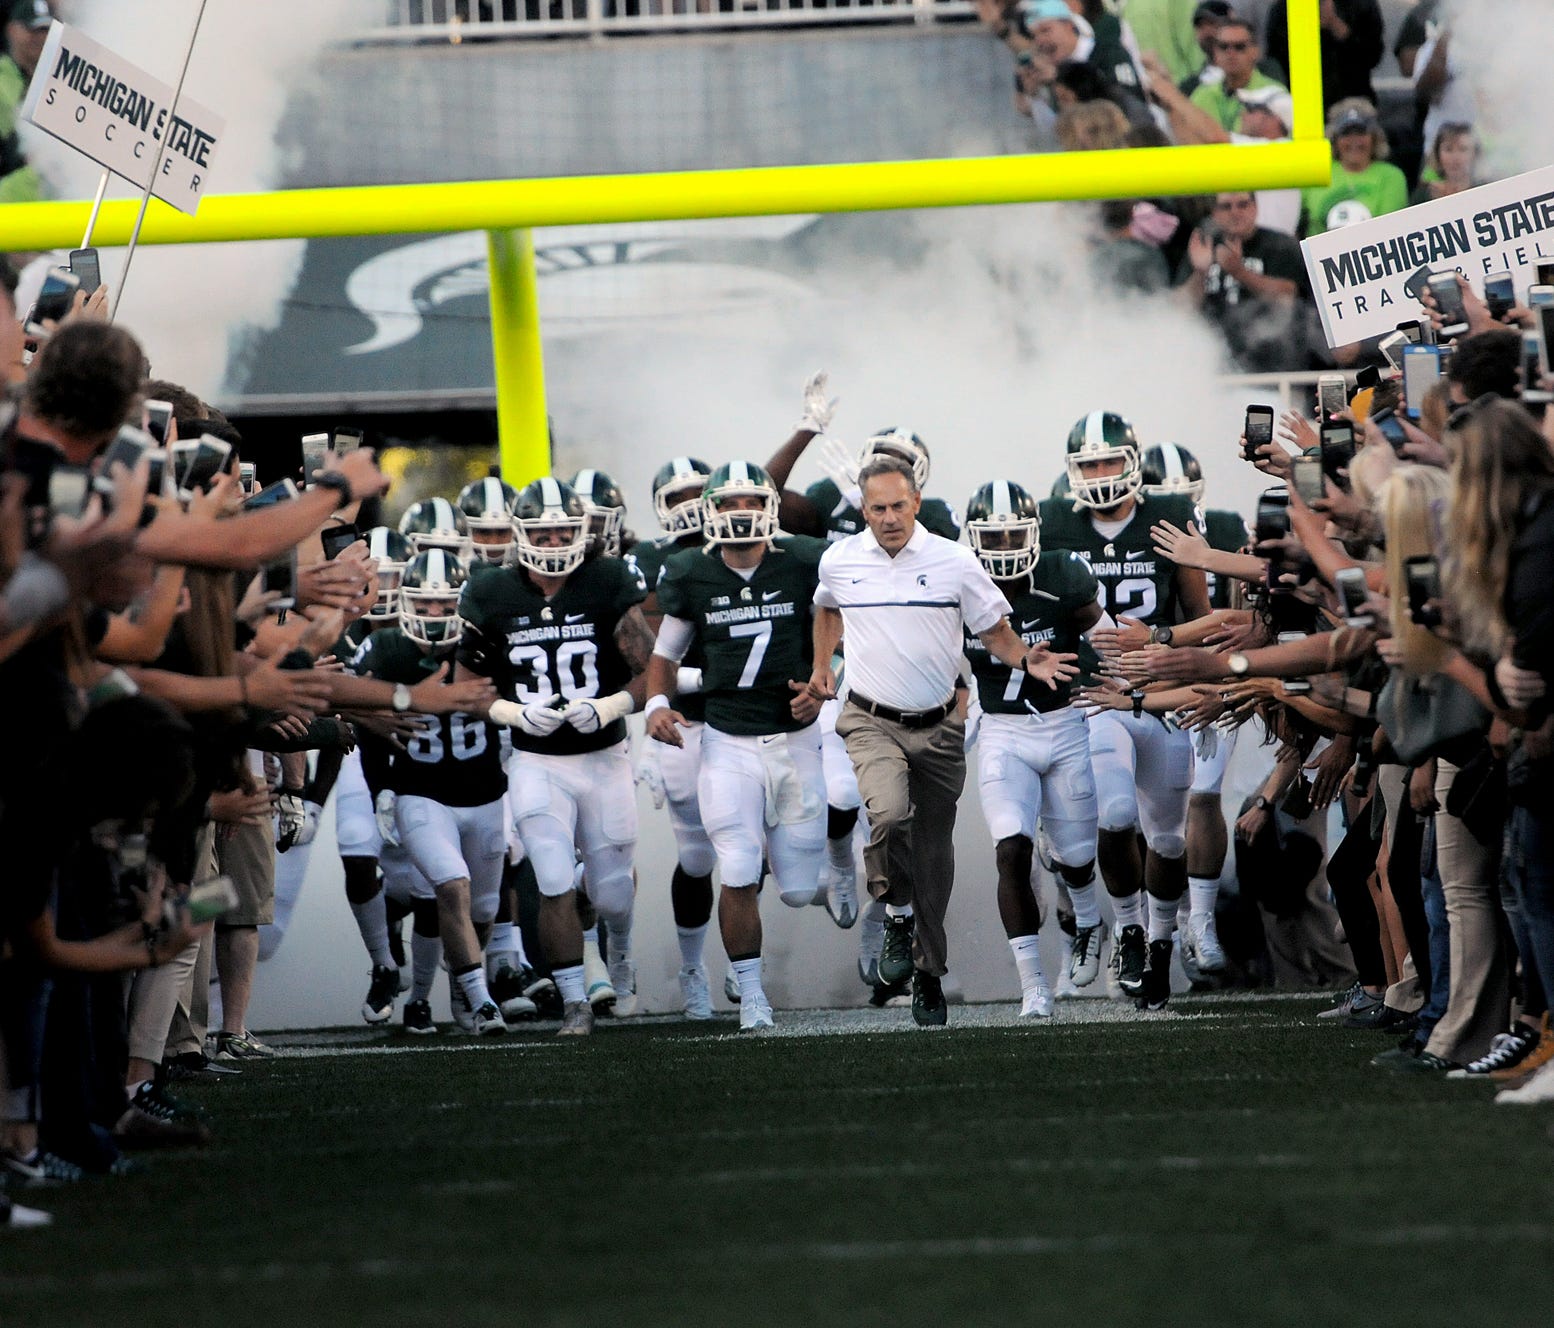 Head coach Mark Dantonio leads the Spartans onto the field before the first half of play against Furman in the Spartan's opening game of the 2016 season on Friday.